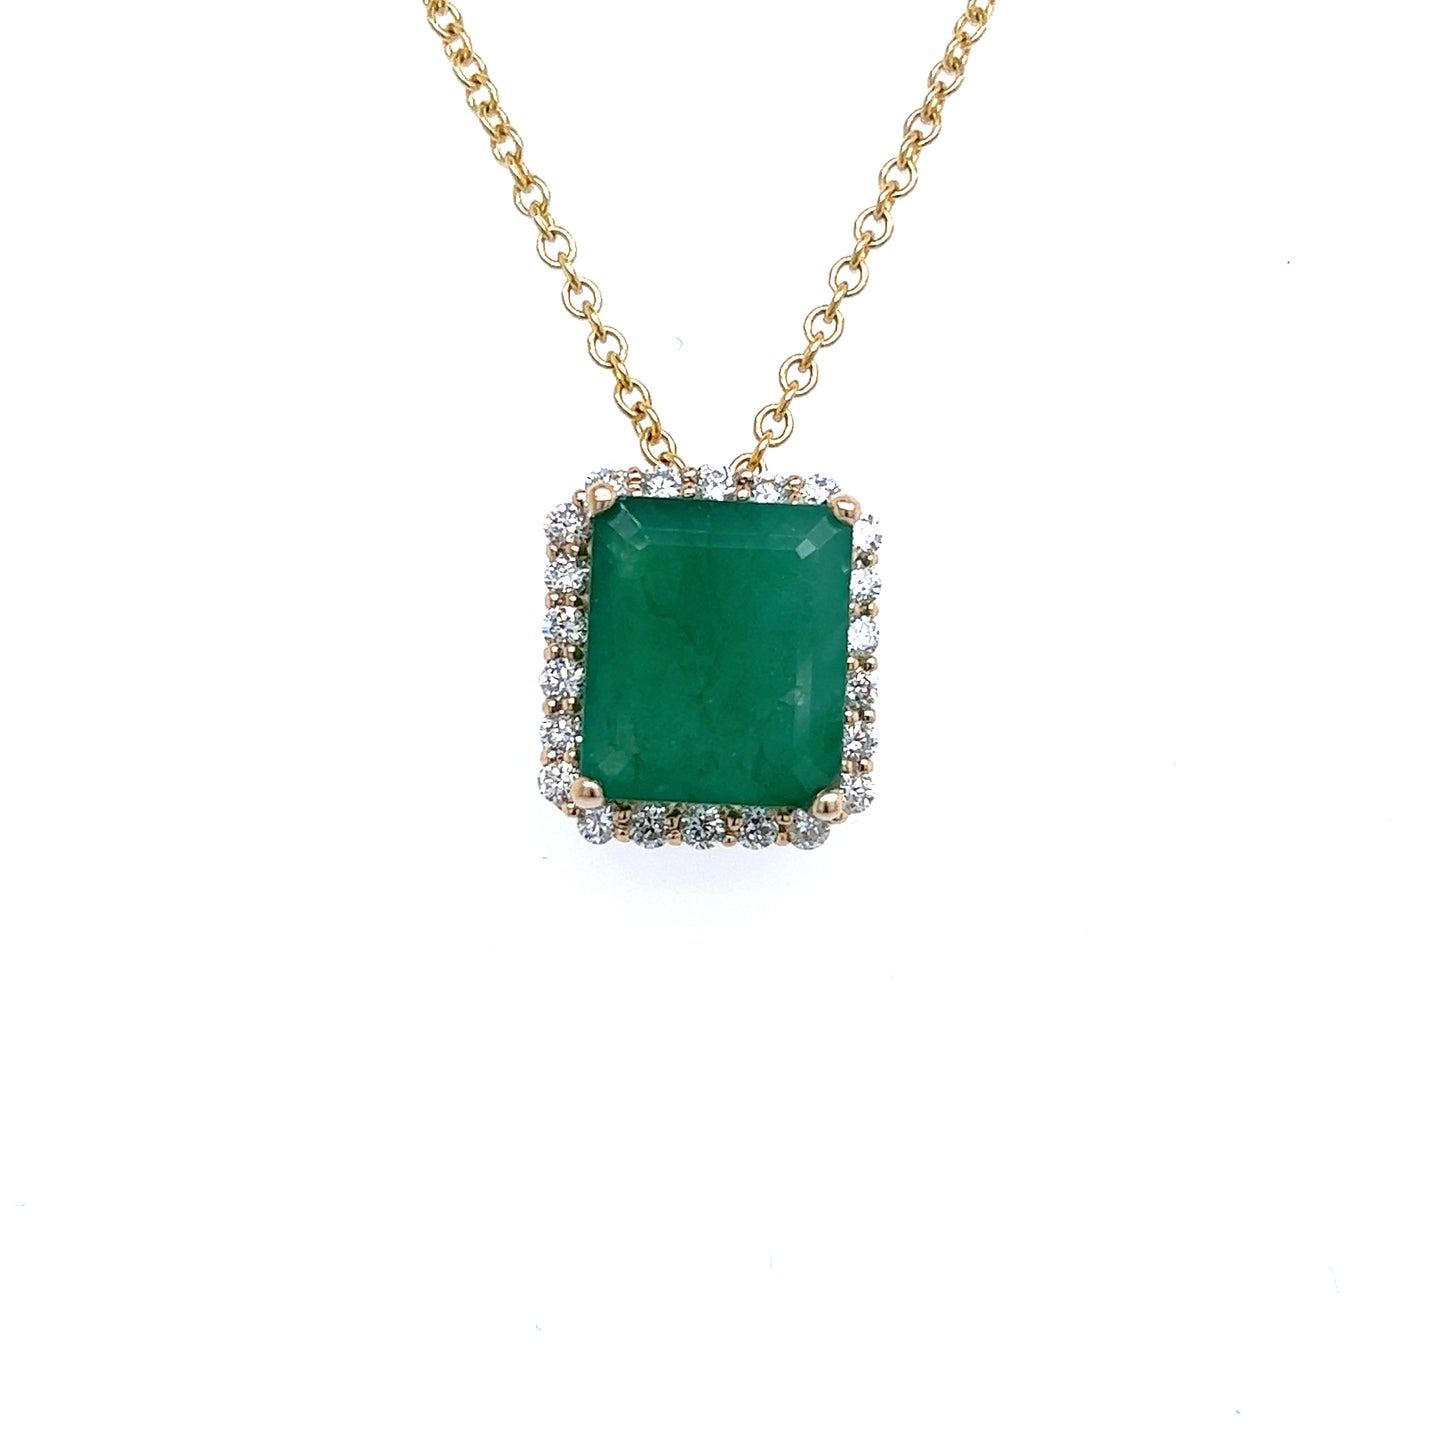 Natural Emerald Diamond Pendant Necklace 17" 14k Yellow Gold 5.05 TCW Certified $6,950 215627 - Certified Fine Jewelry